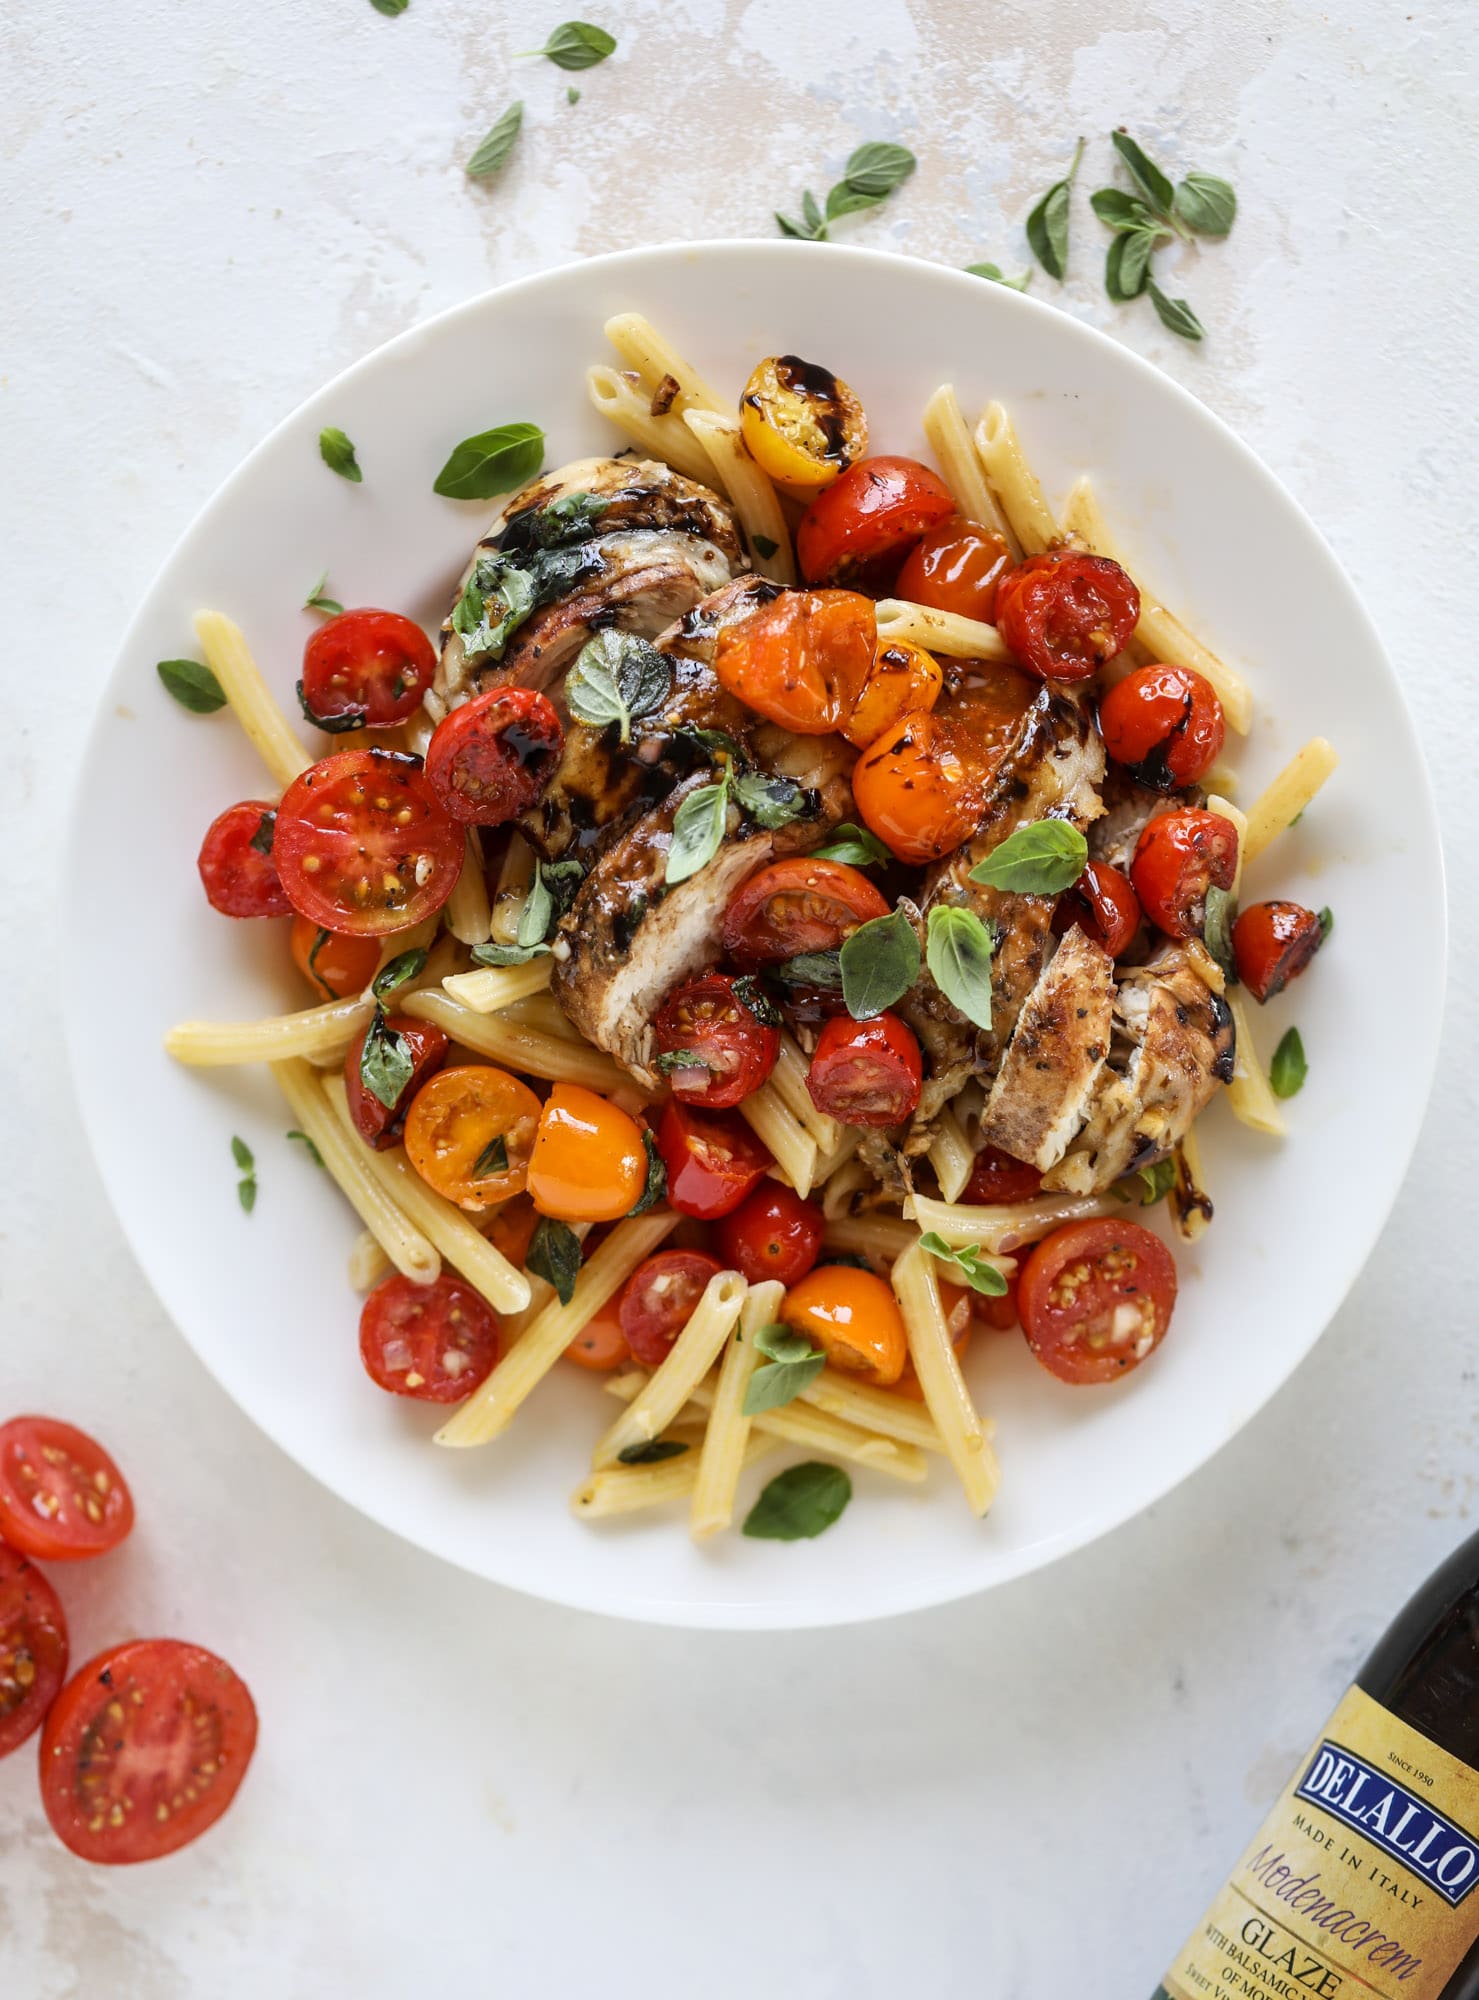 This bruschetta chicken is the perfect summer garden meal! Juicy, flavorful chicken topped with fresh tomatoes, garlic, basil and balsamic glaze, along with a touch of cheese. Served with pasta, it's an incredible meal. I howsweeteats.com #bruschetta #chicken #pasta #tomatoes #basil 